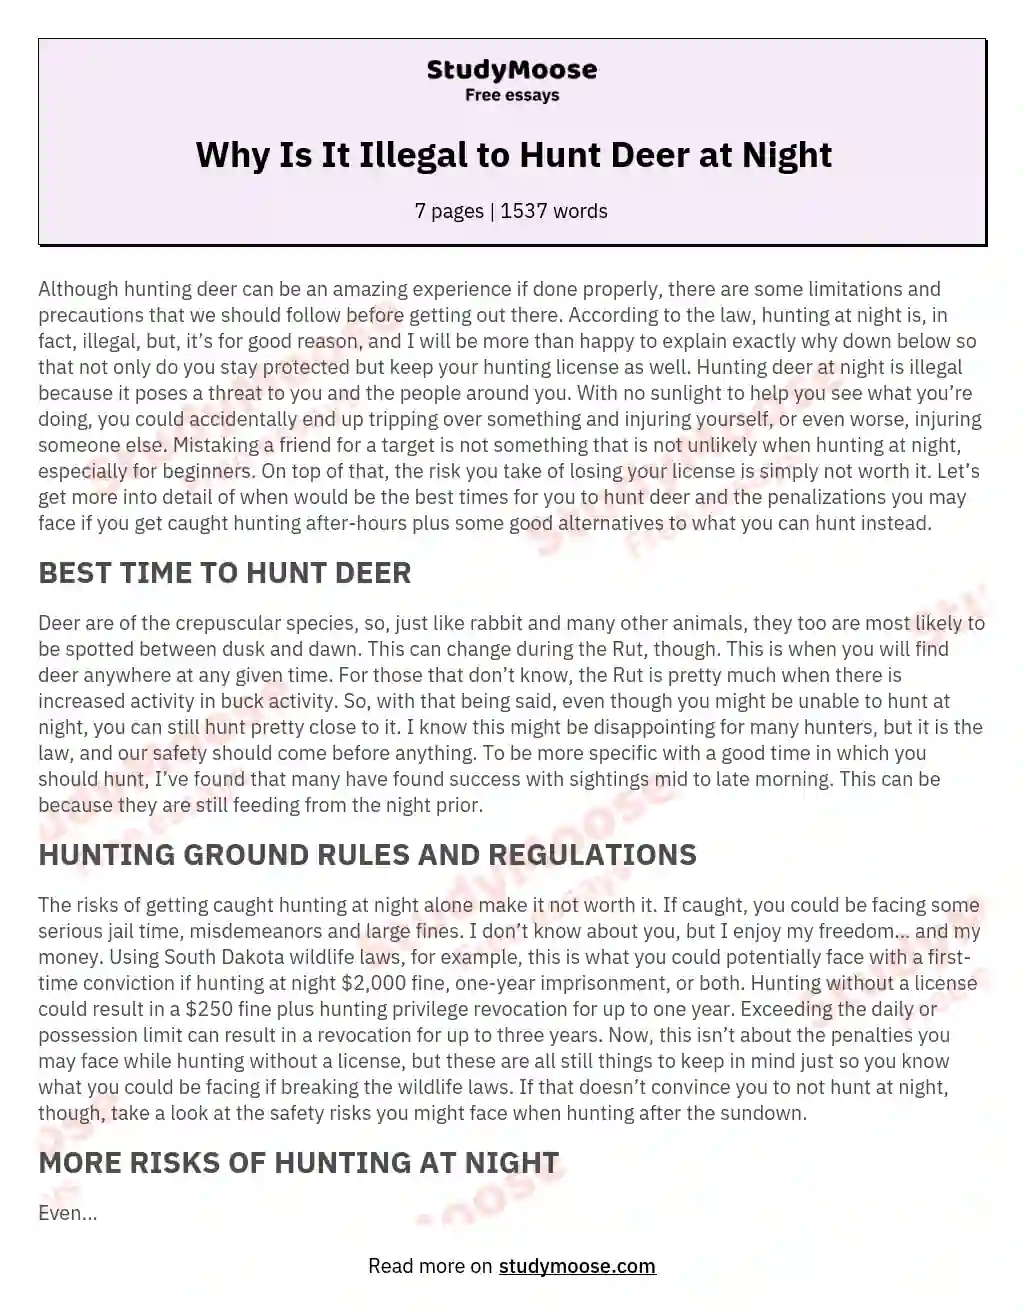 Why Is It Illegal to Hunt Deer at Night essay